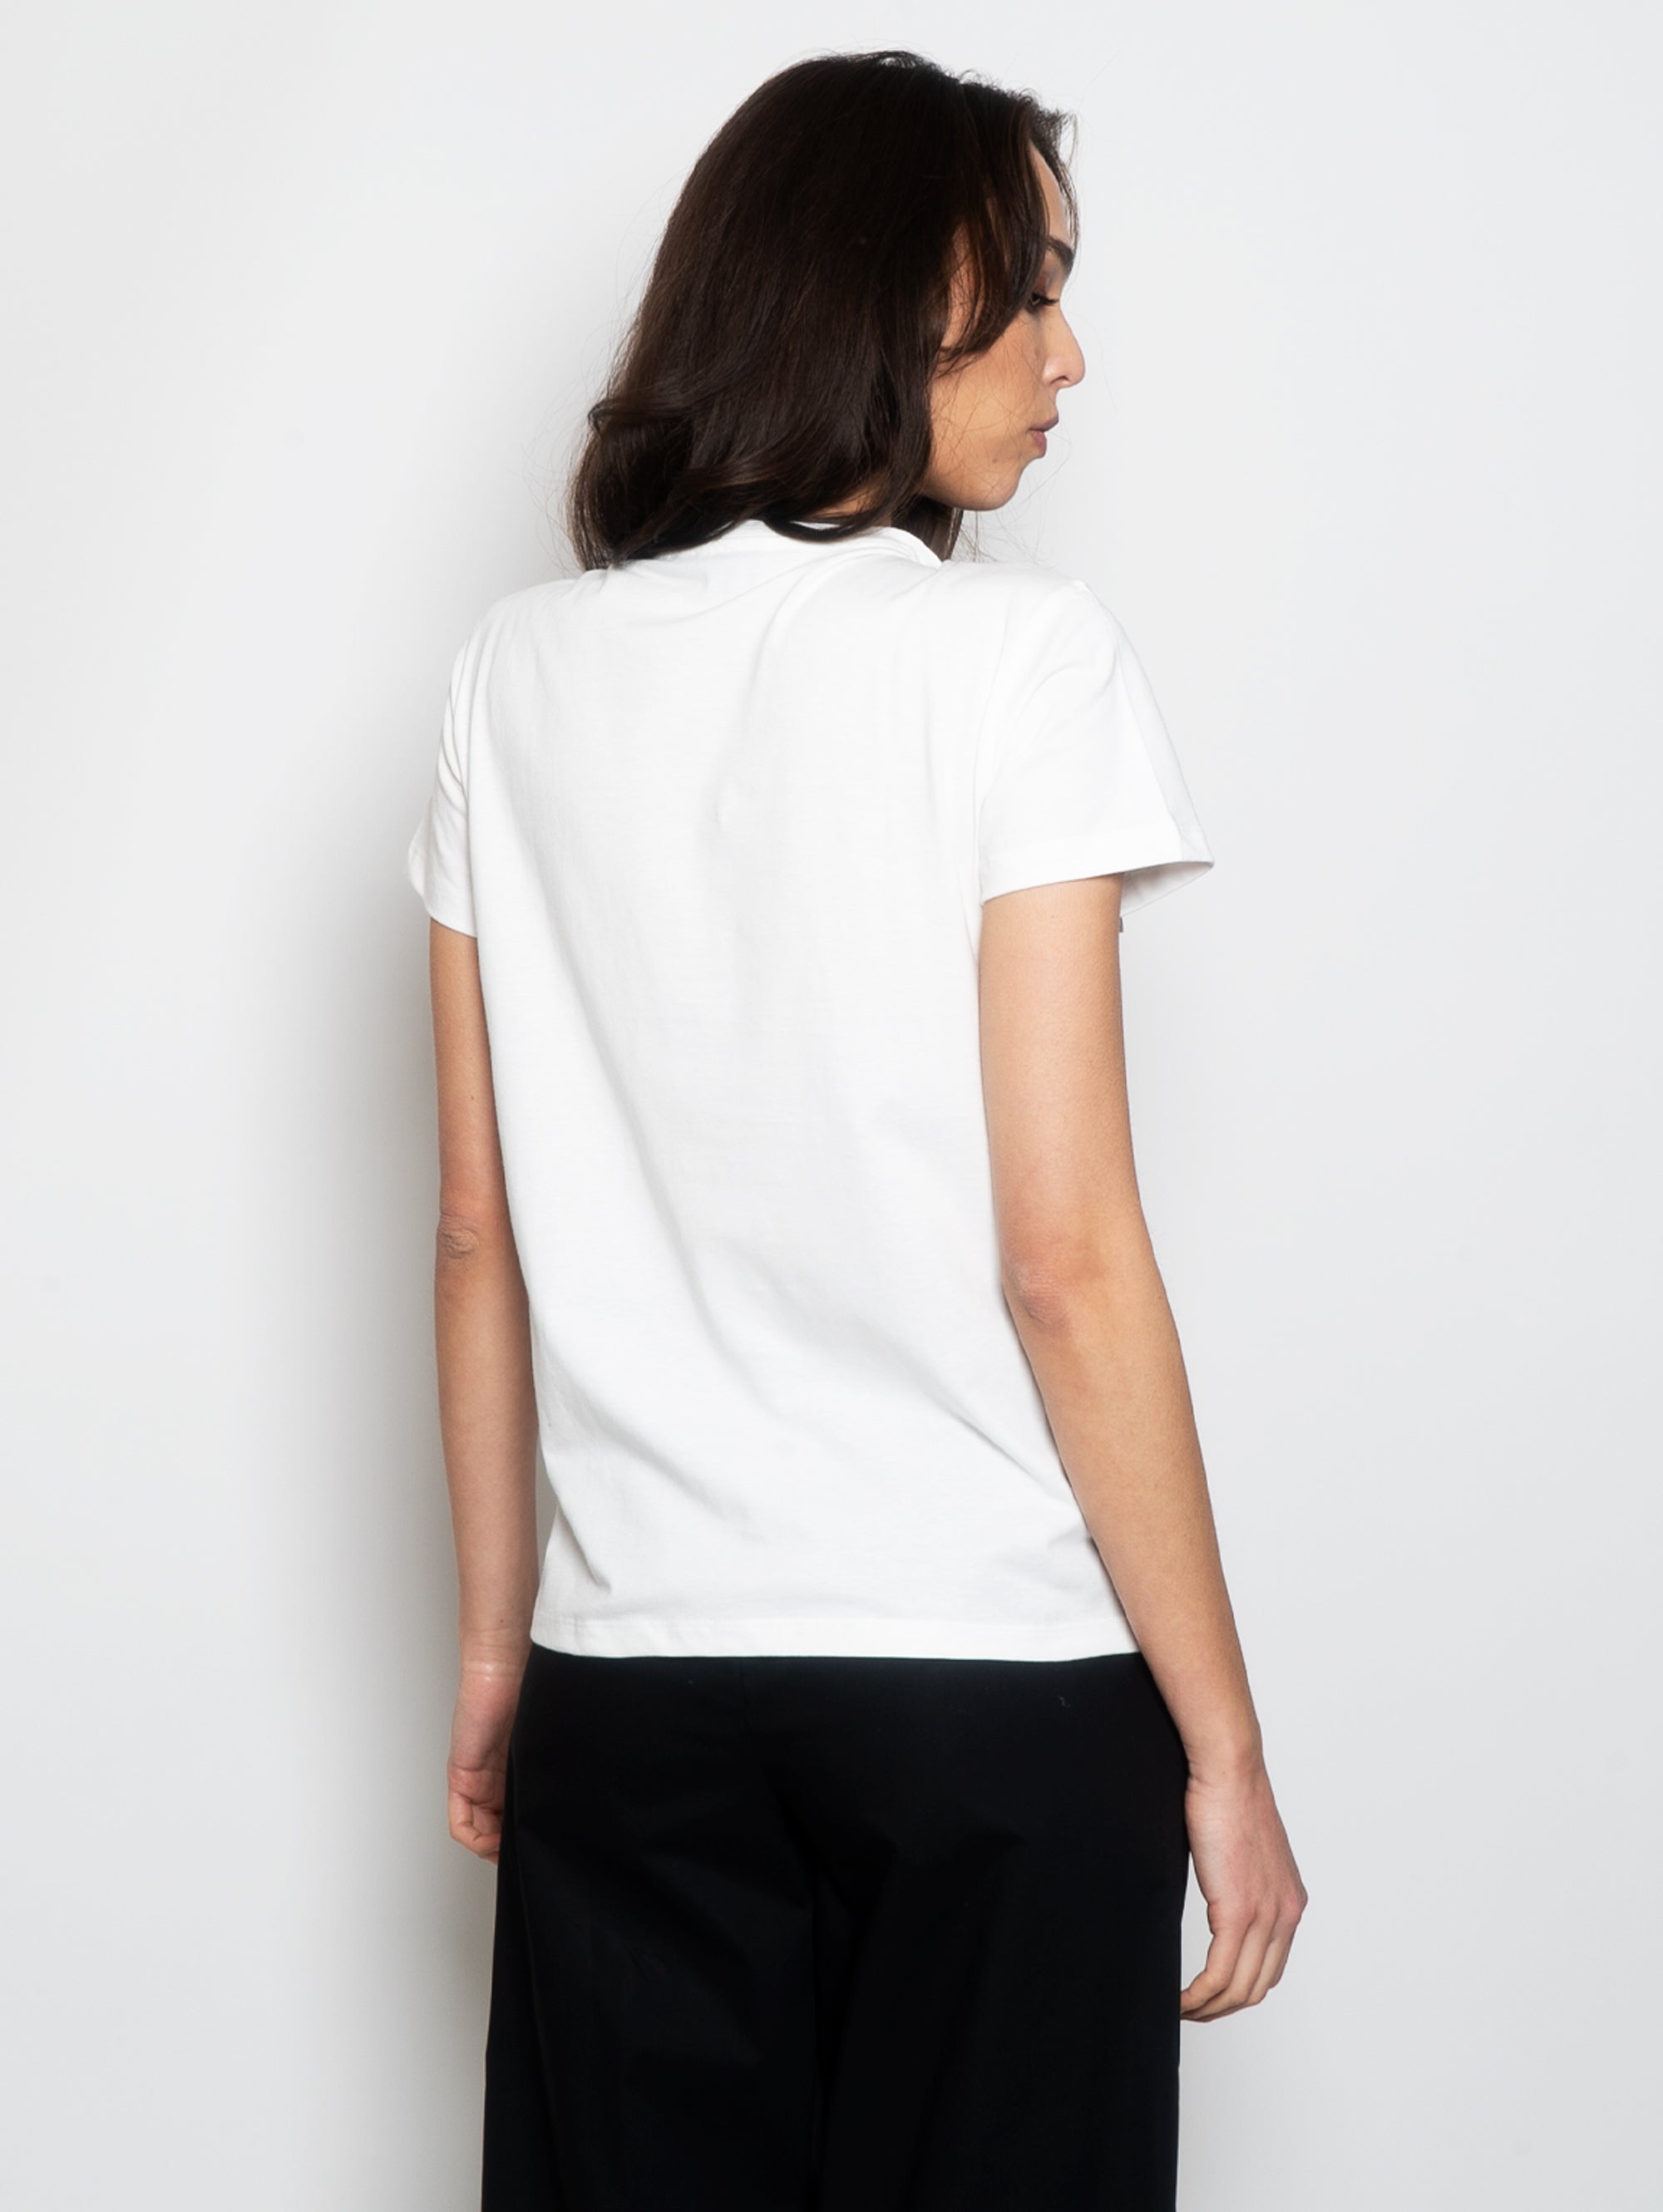 T-shirt with White Embroidered Heart